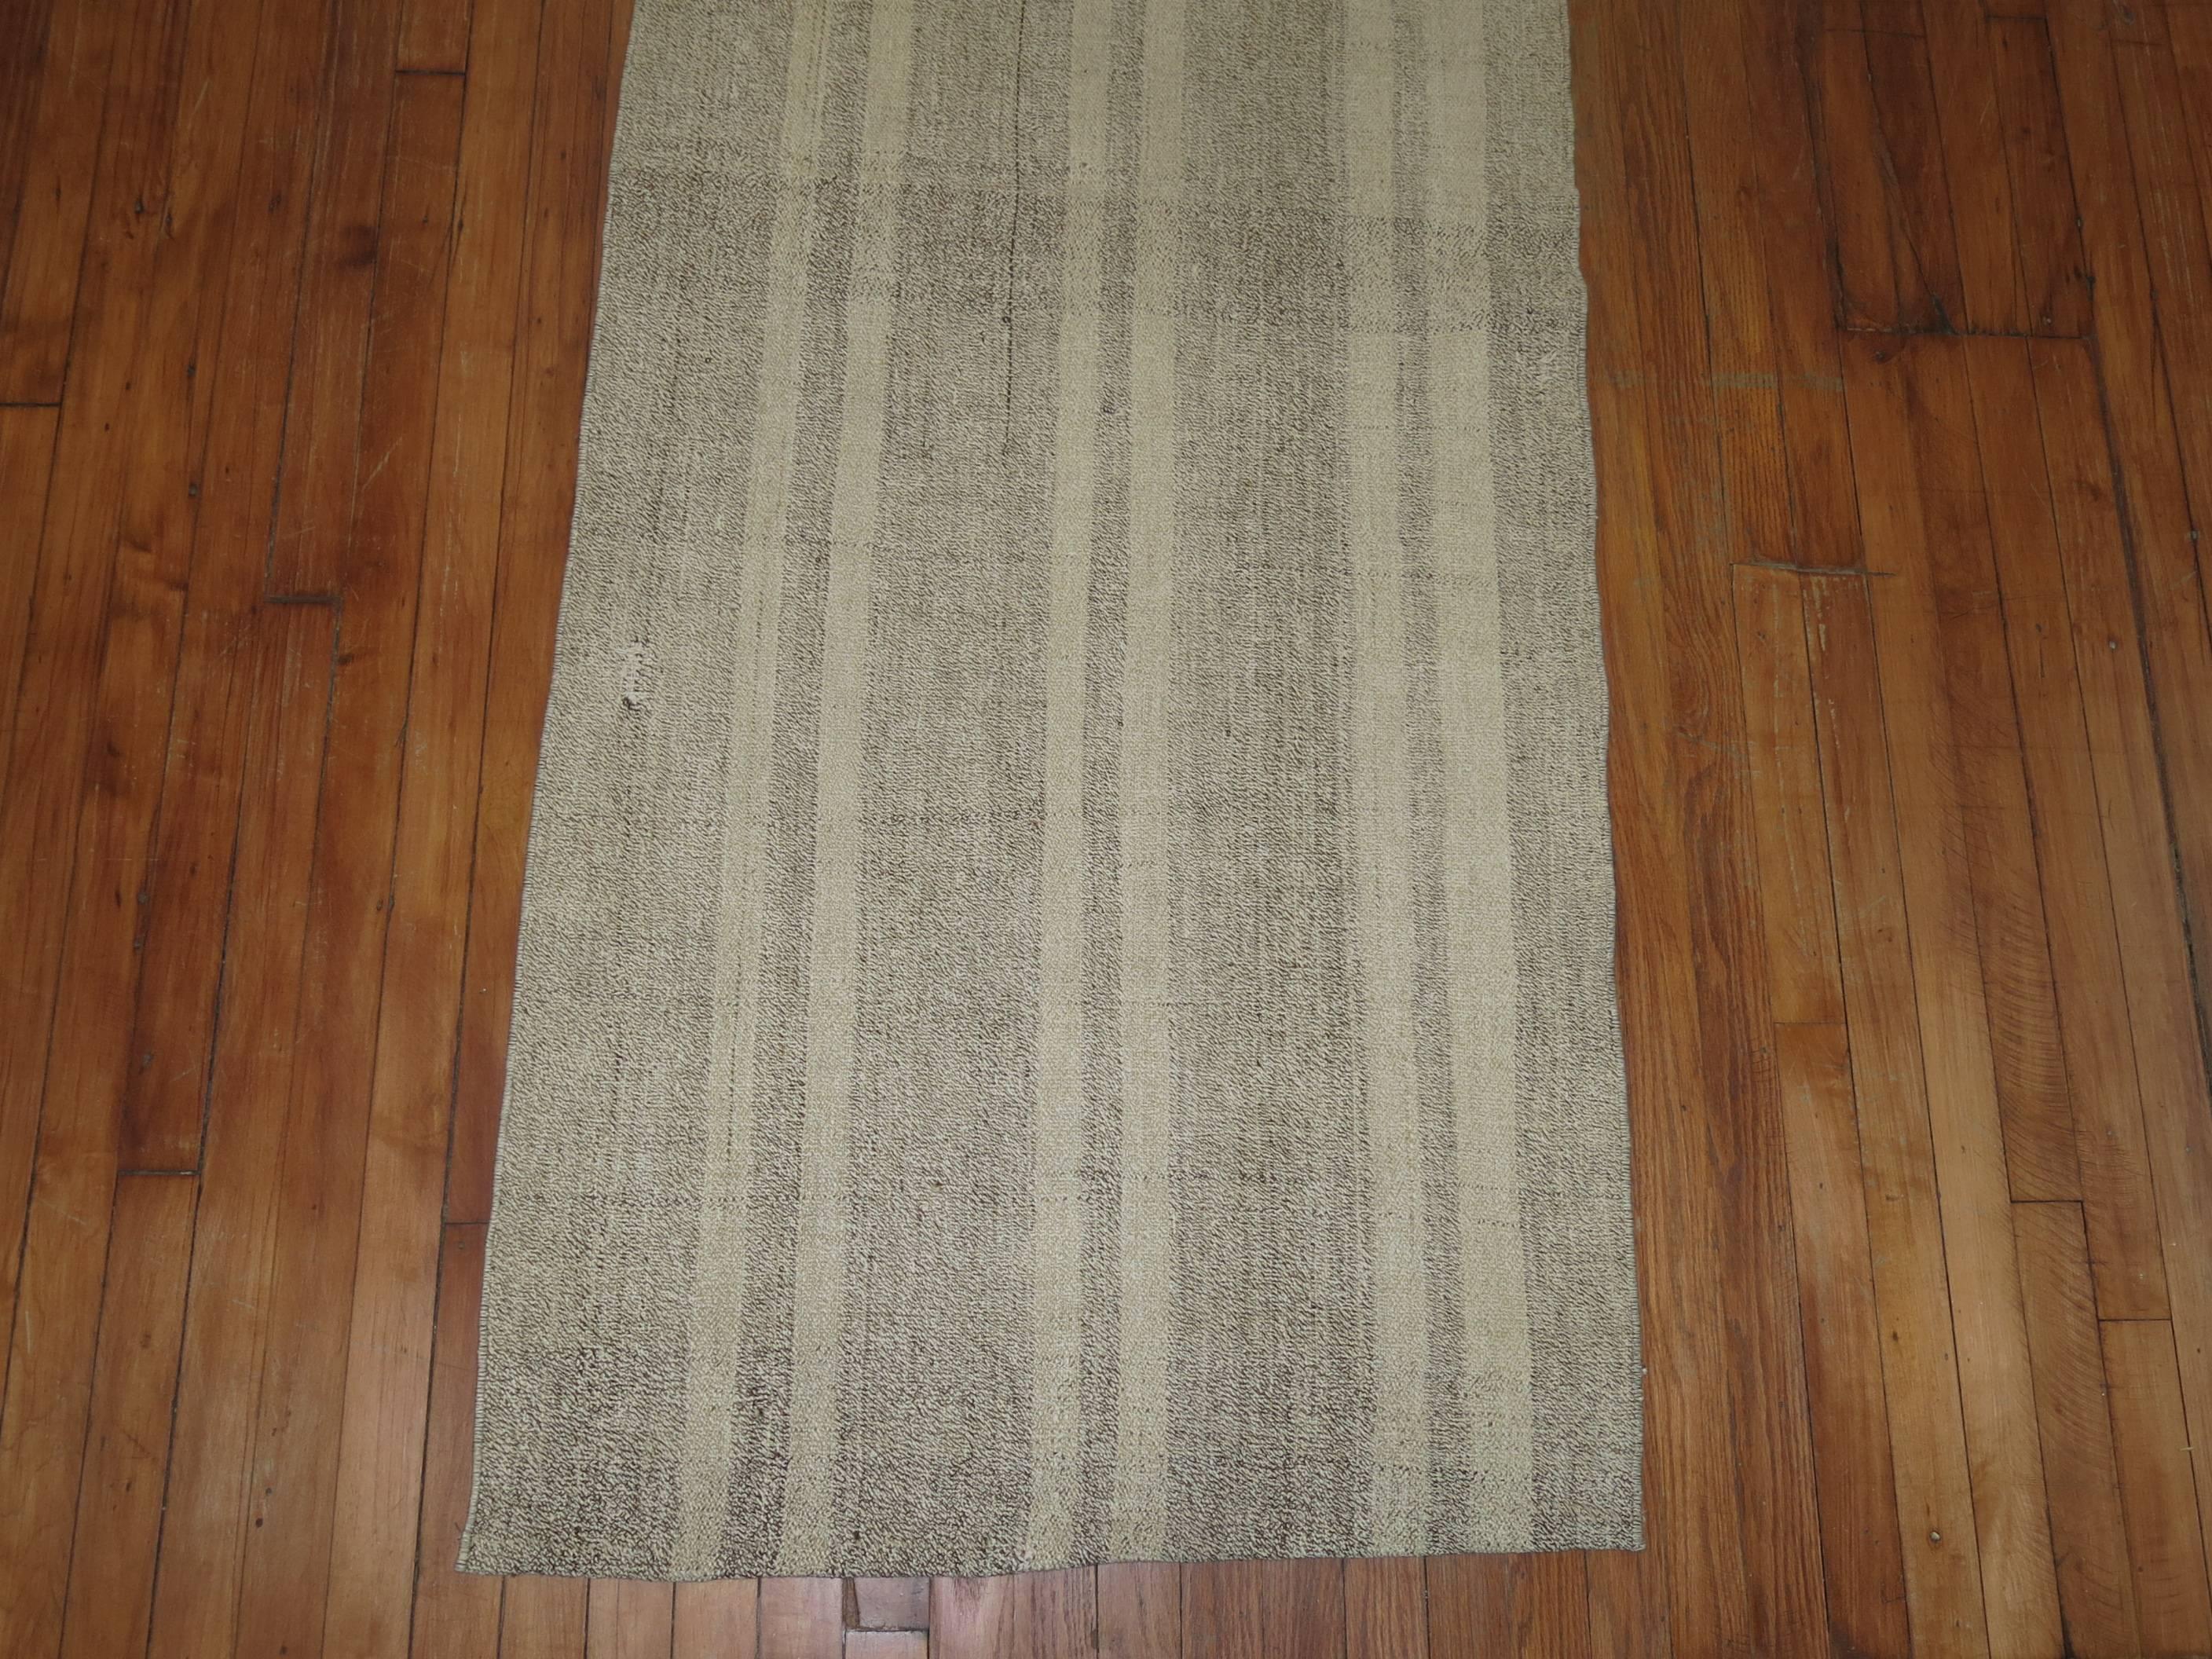 Rare size turkish Kilim runner with a striped design in gray and ivory.
